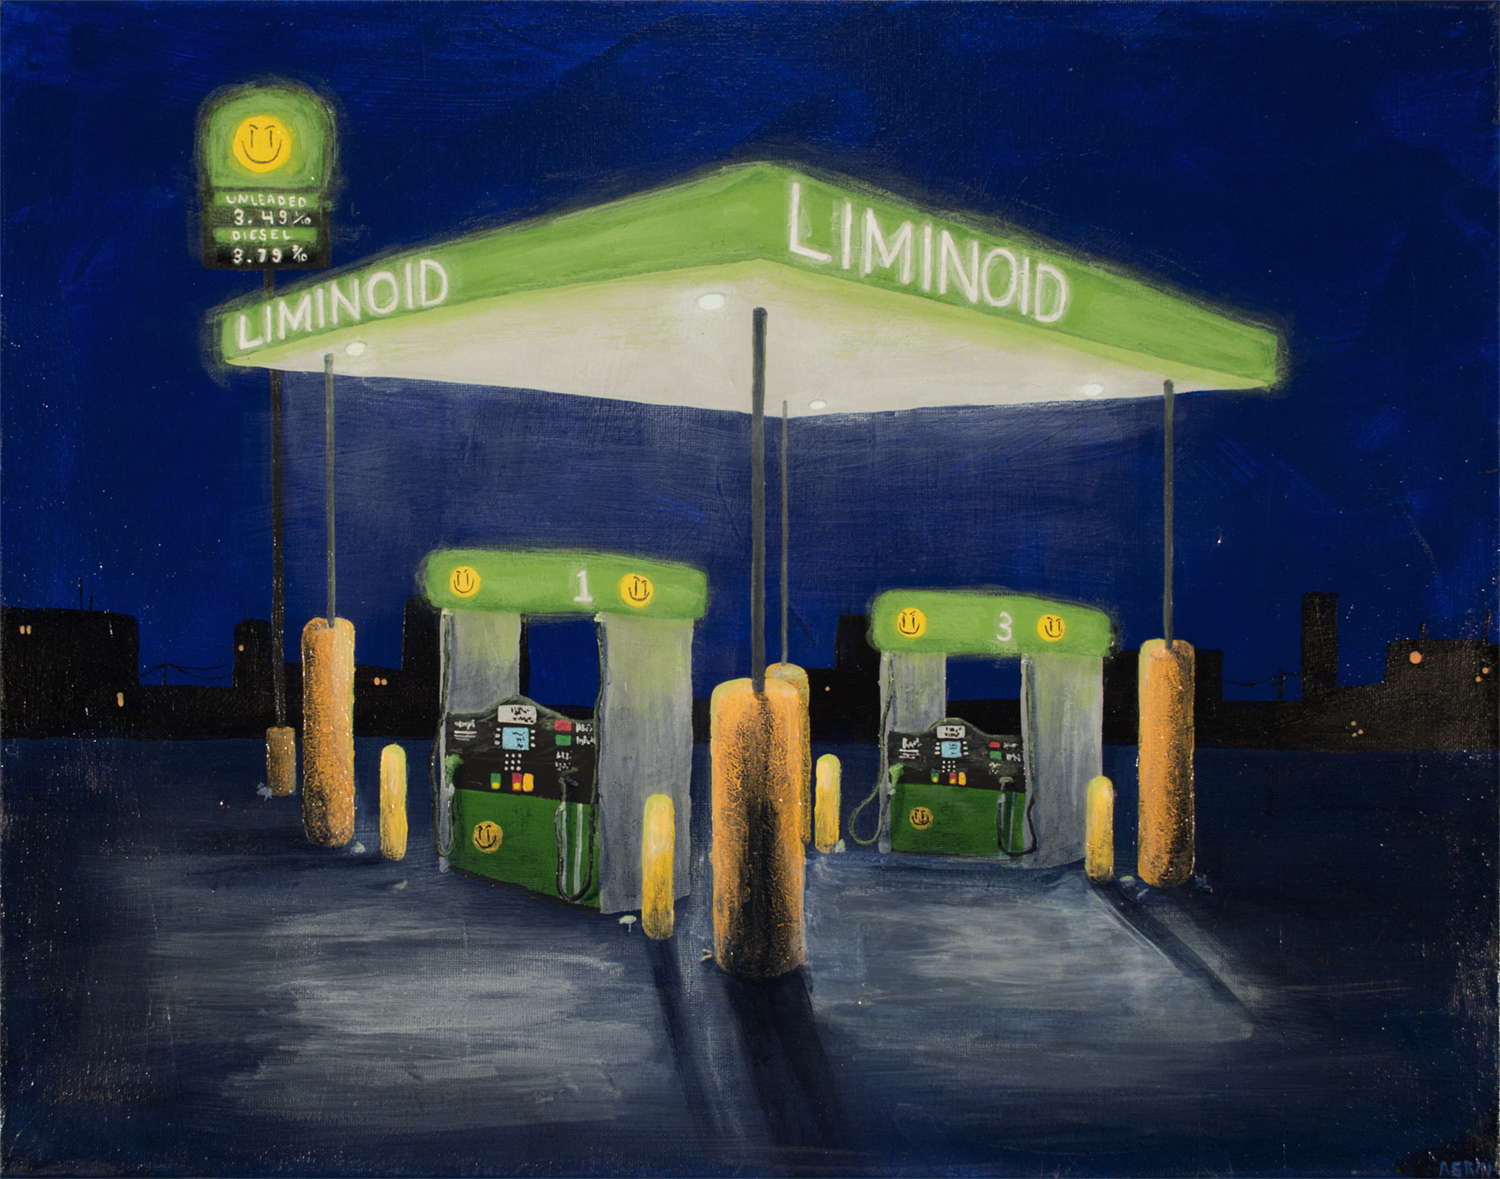 a lit gas station called Liminoid at night, courtesy of the artist